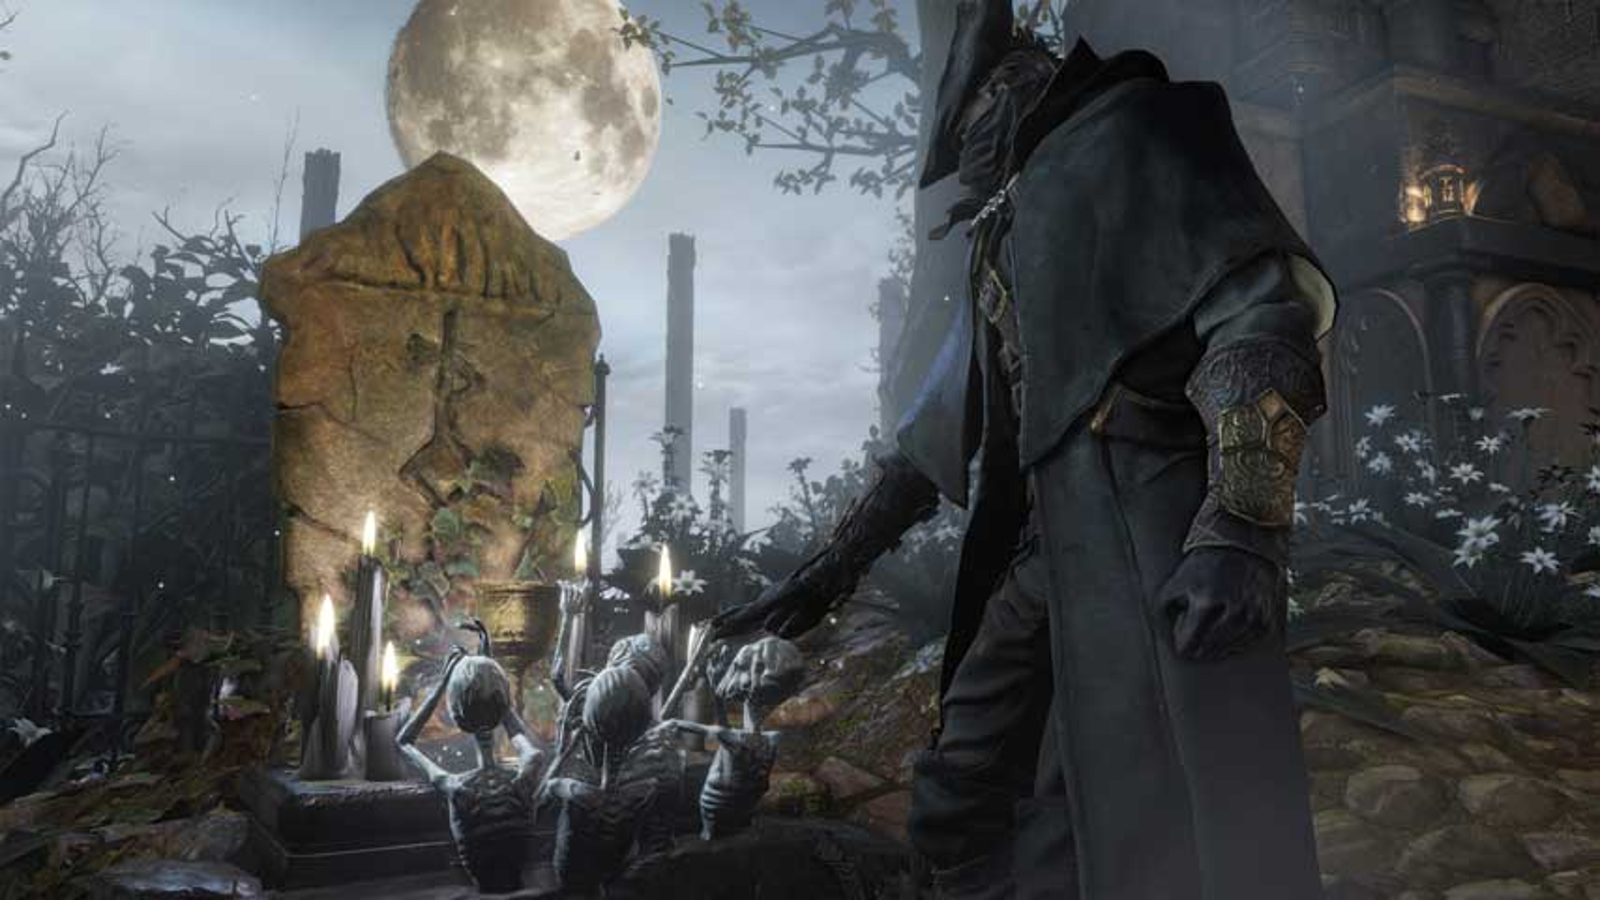 Bloodborne PS5 & PC Release Finally Seems Likely, Teases Insider